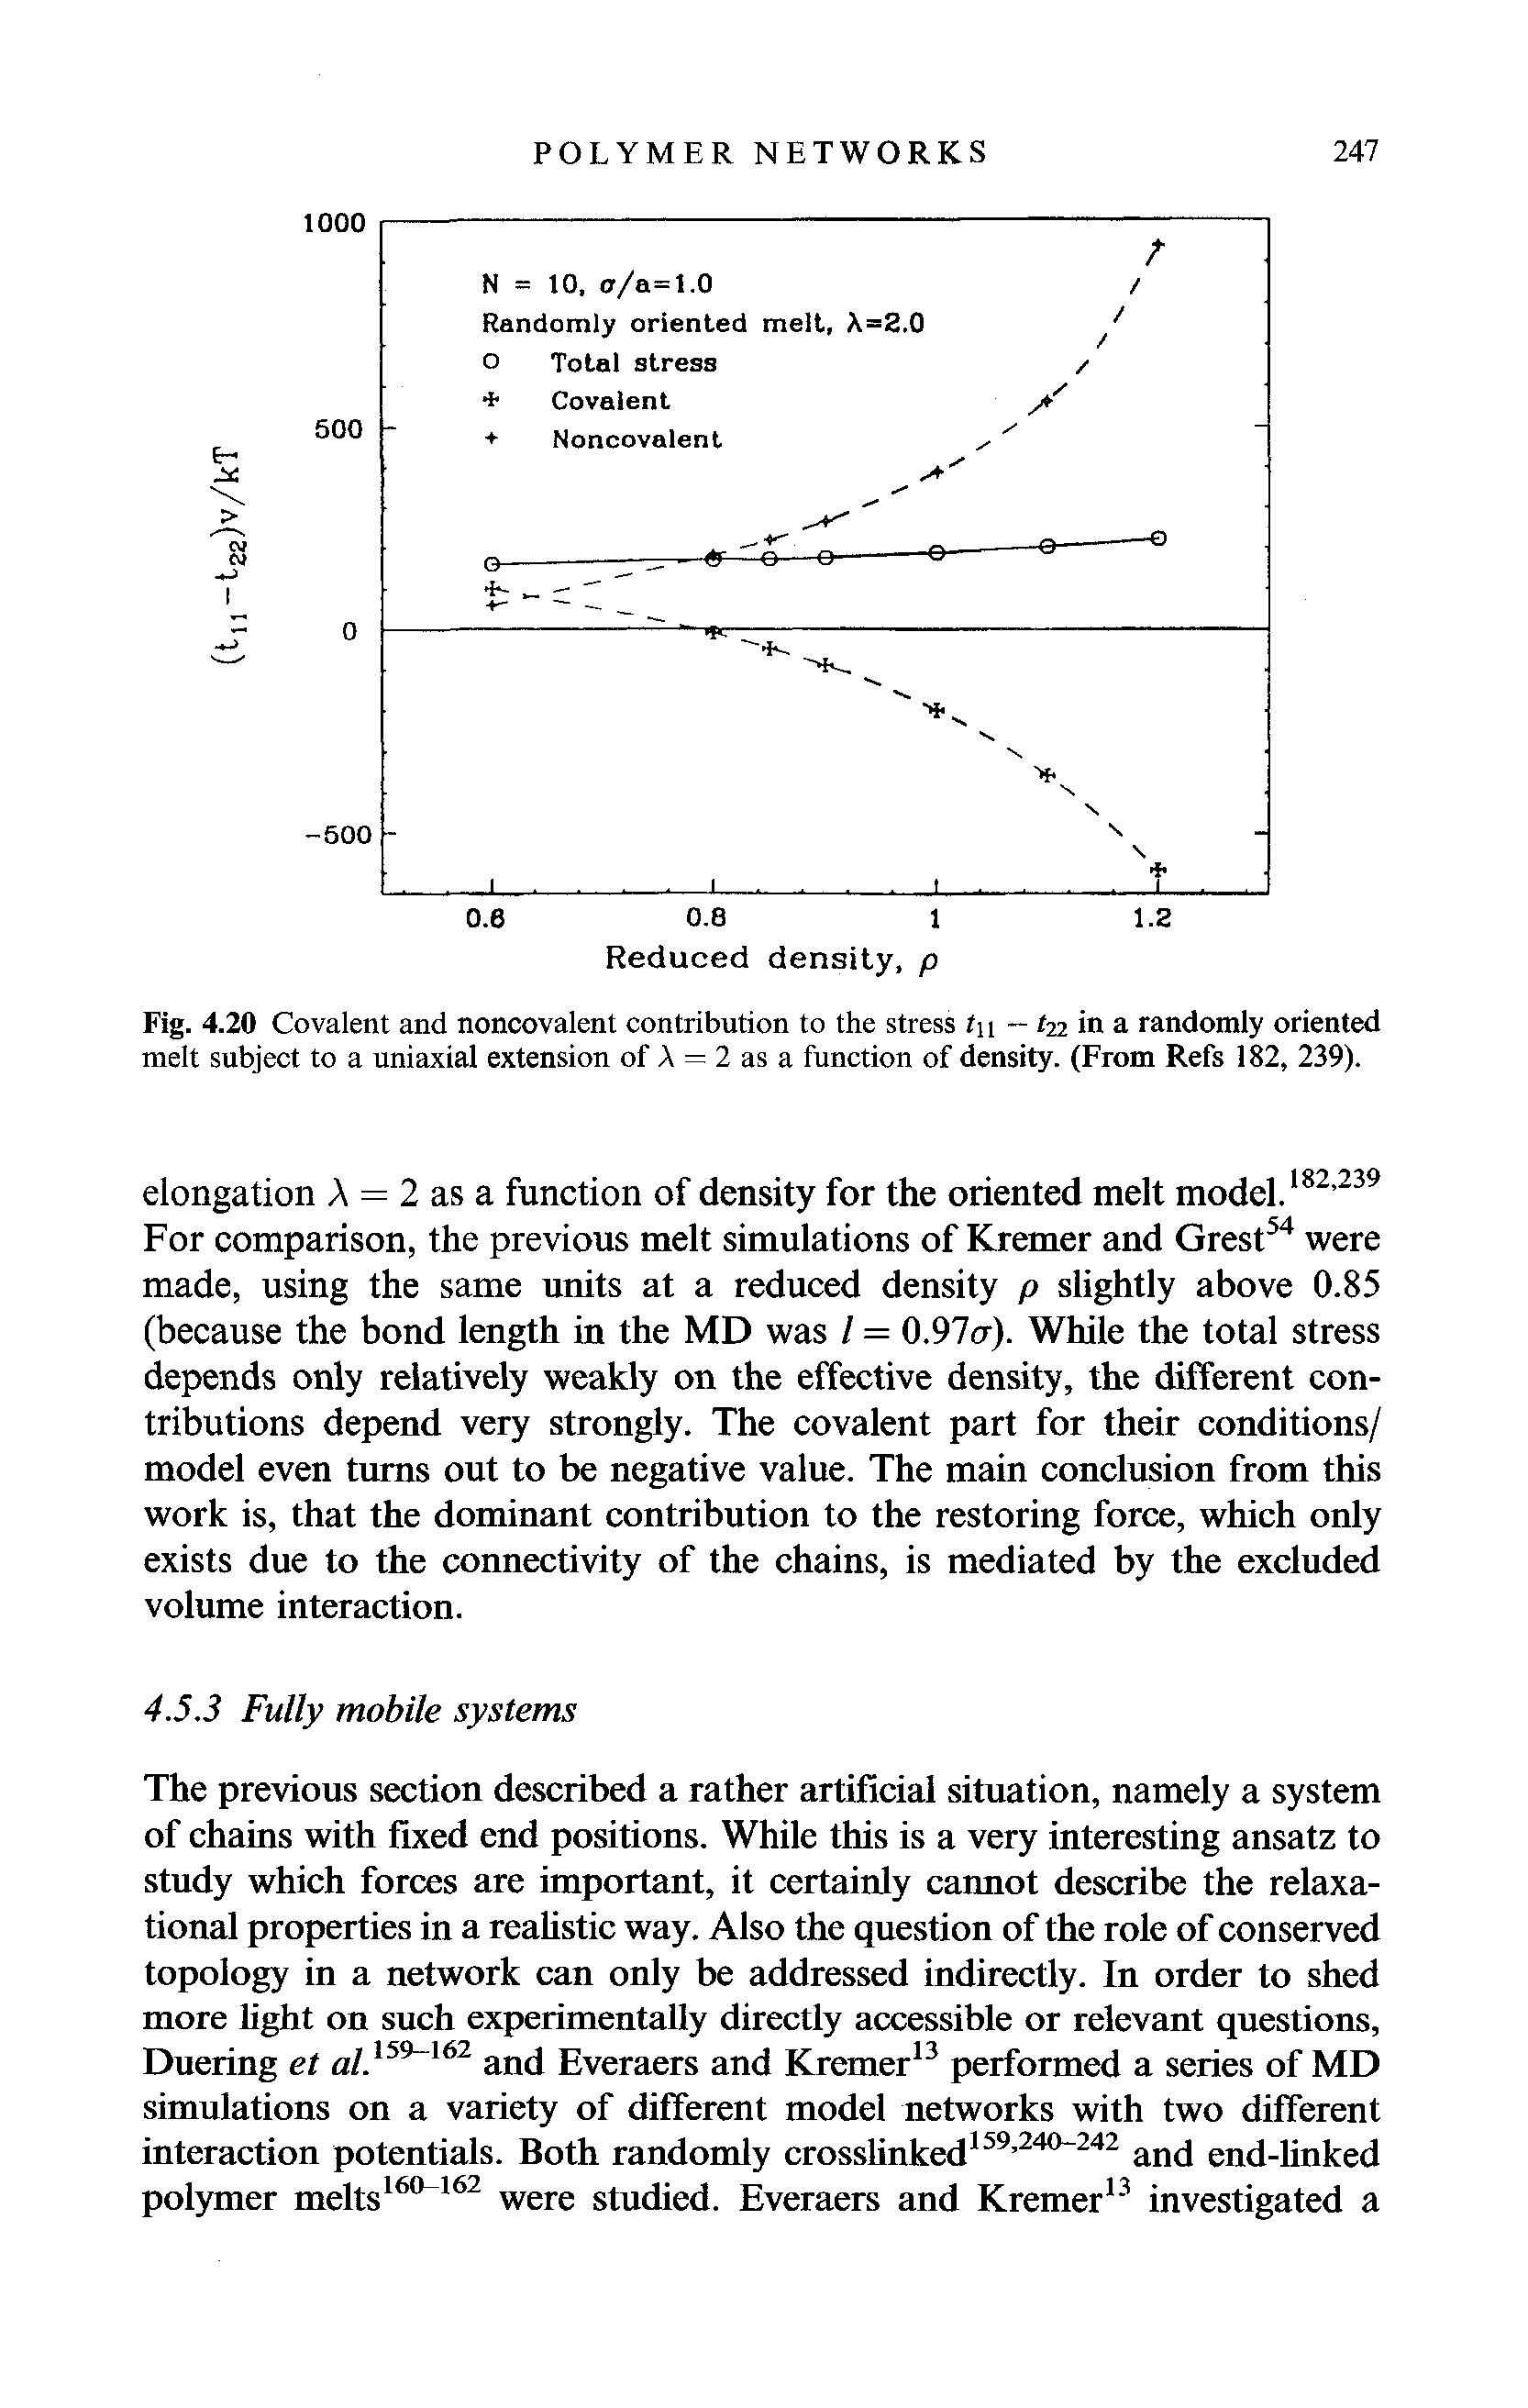 Fig. 4.20 Covalent and noncovalent contribution to the stress tu — /22 in a randomly oriented melt subject to a uniaxial extension of A = 2 as a function of density. (From Refs 182, 239).